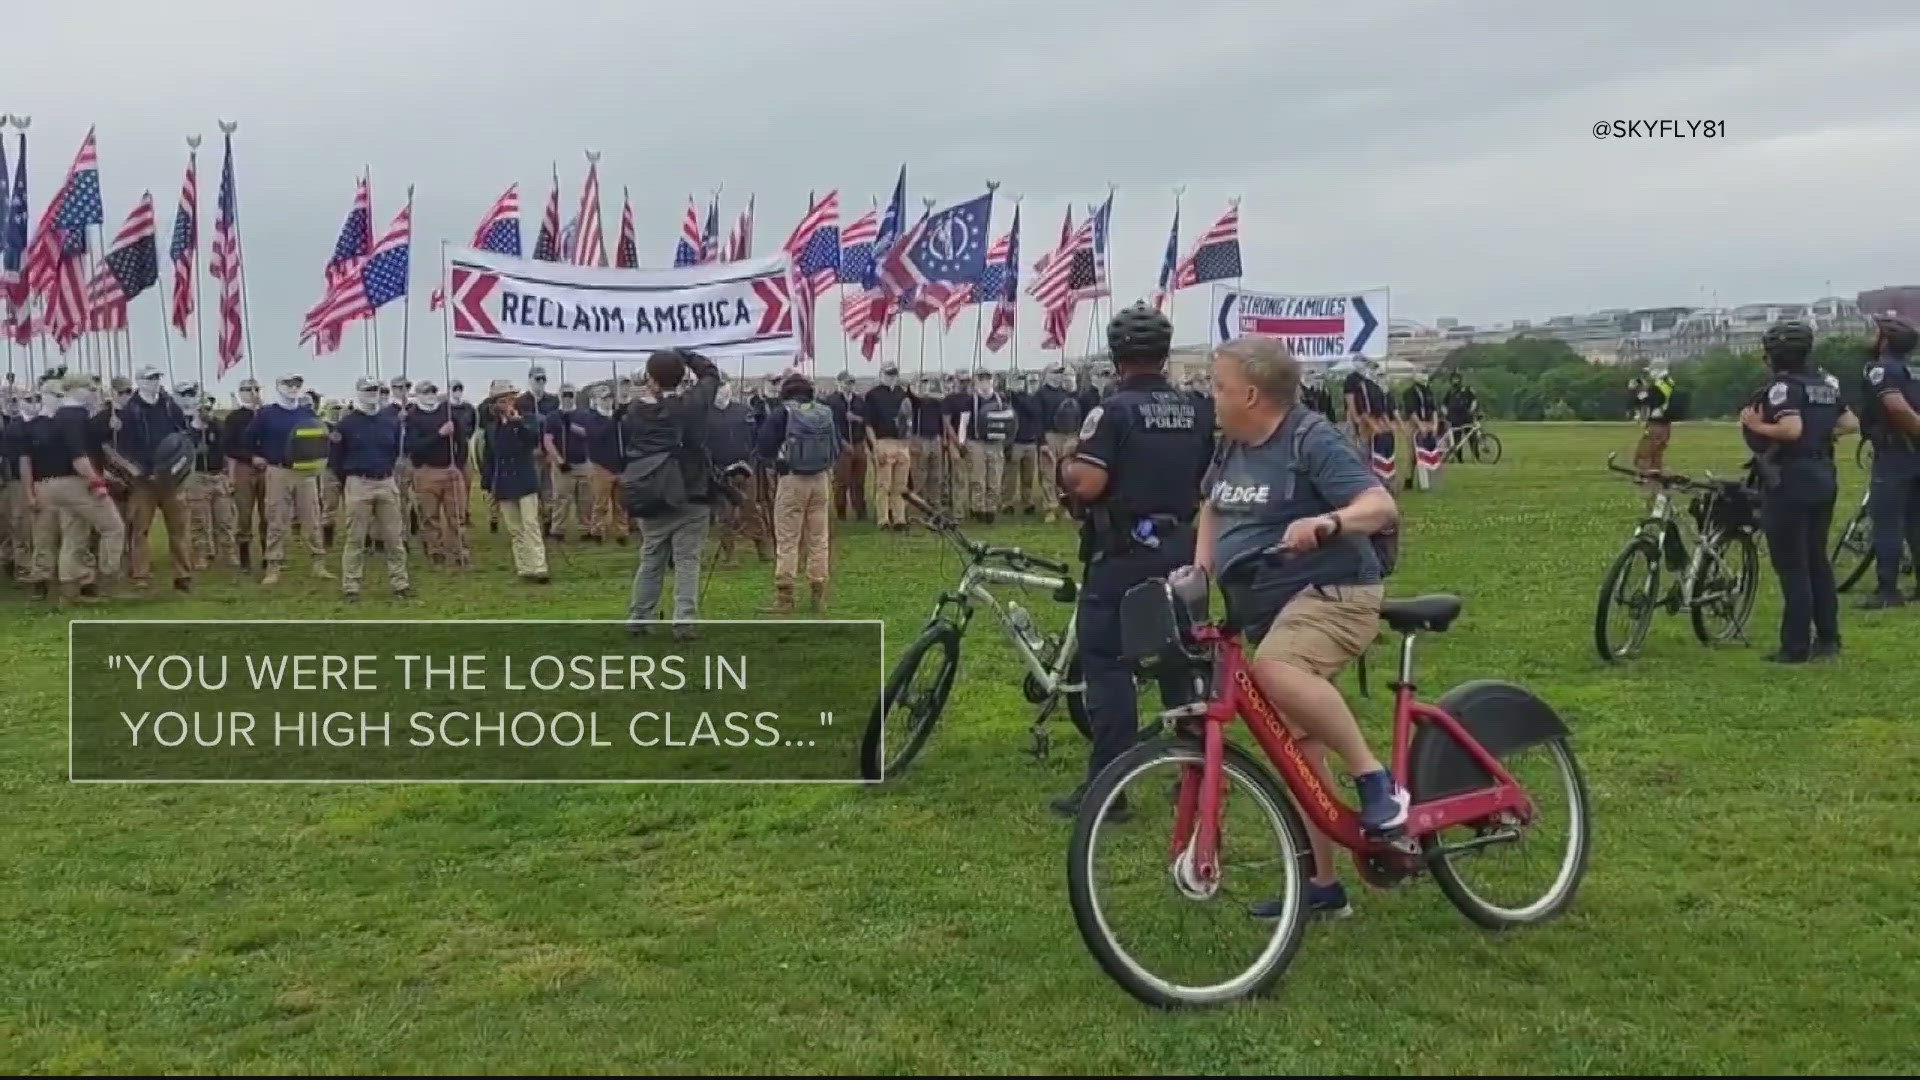 Patriot Front - a white supremacist group recognized by the Anti Defamation League and Southern Poverty Law Center. And a lone cyclist.
Taunting them.